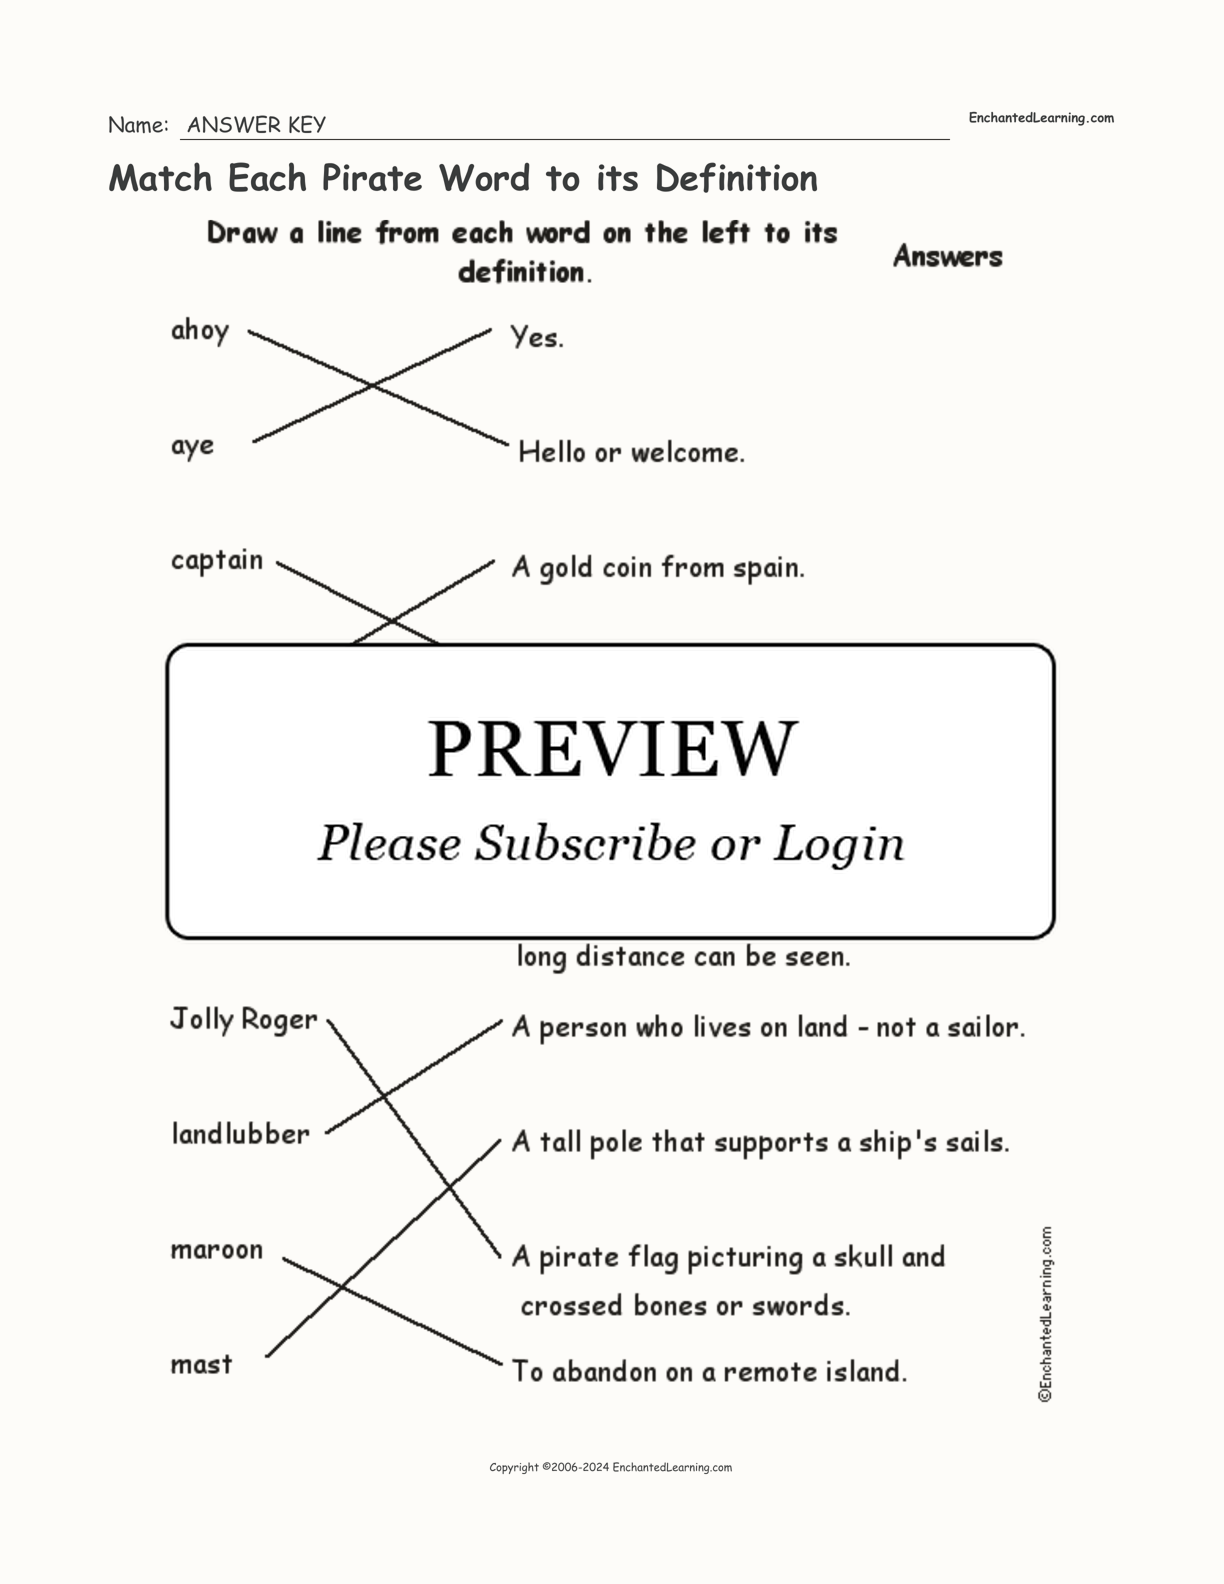 Match Each Pirate Word to its Definition interactive worksheet page 2